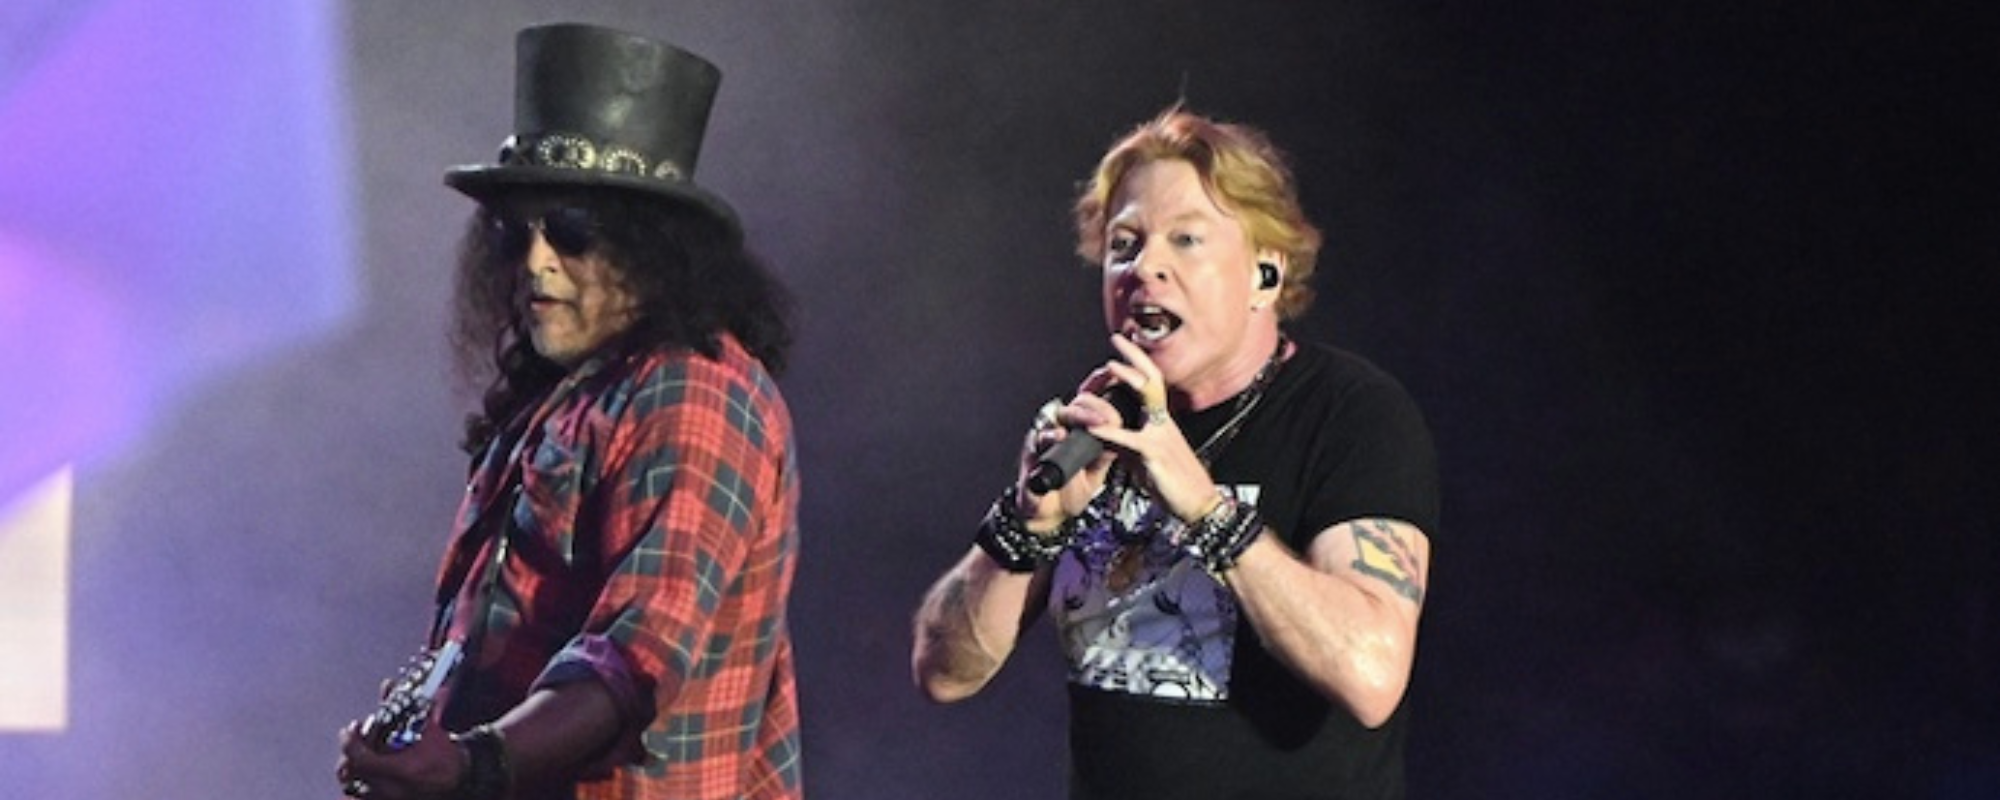 Guns N’ Roses Debut Unreleased Song “The General” at Their L.A. Show Thursday